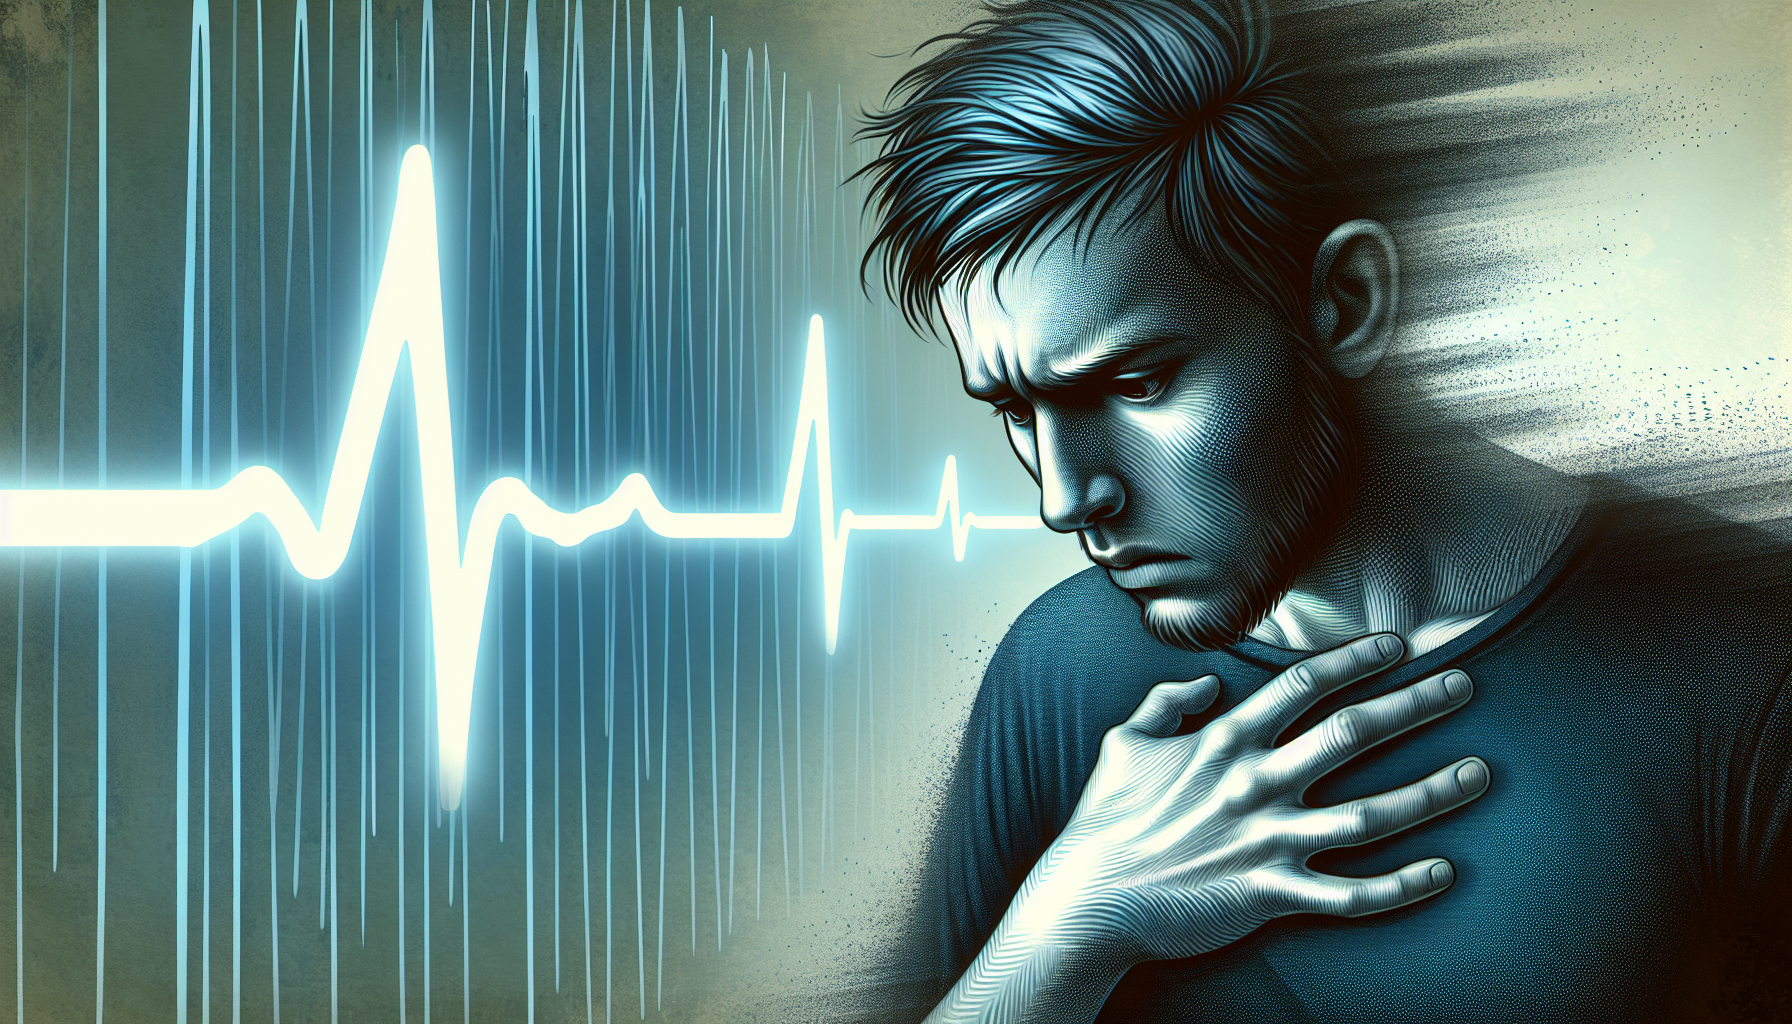 Illustration of a person experiencing symptoms of magnesium deficiency like anxiety and irregular heartbeat